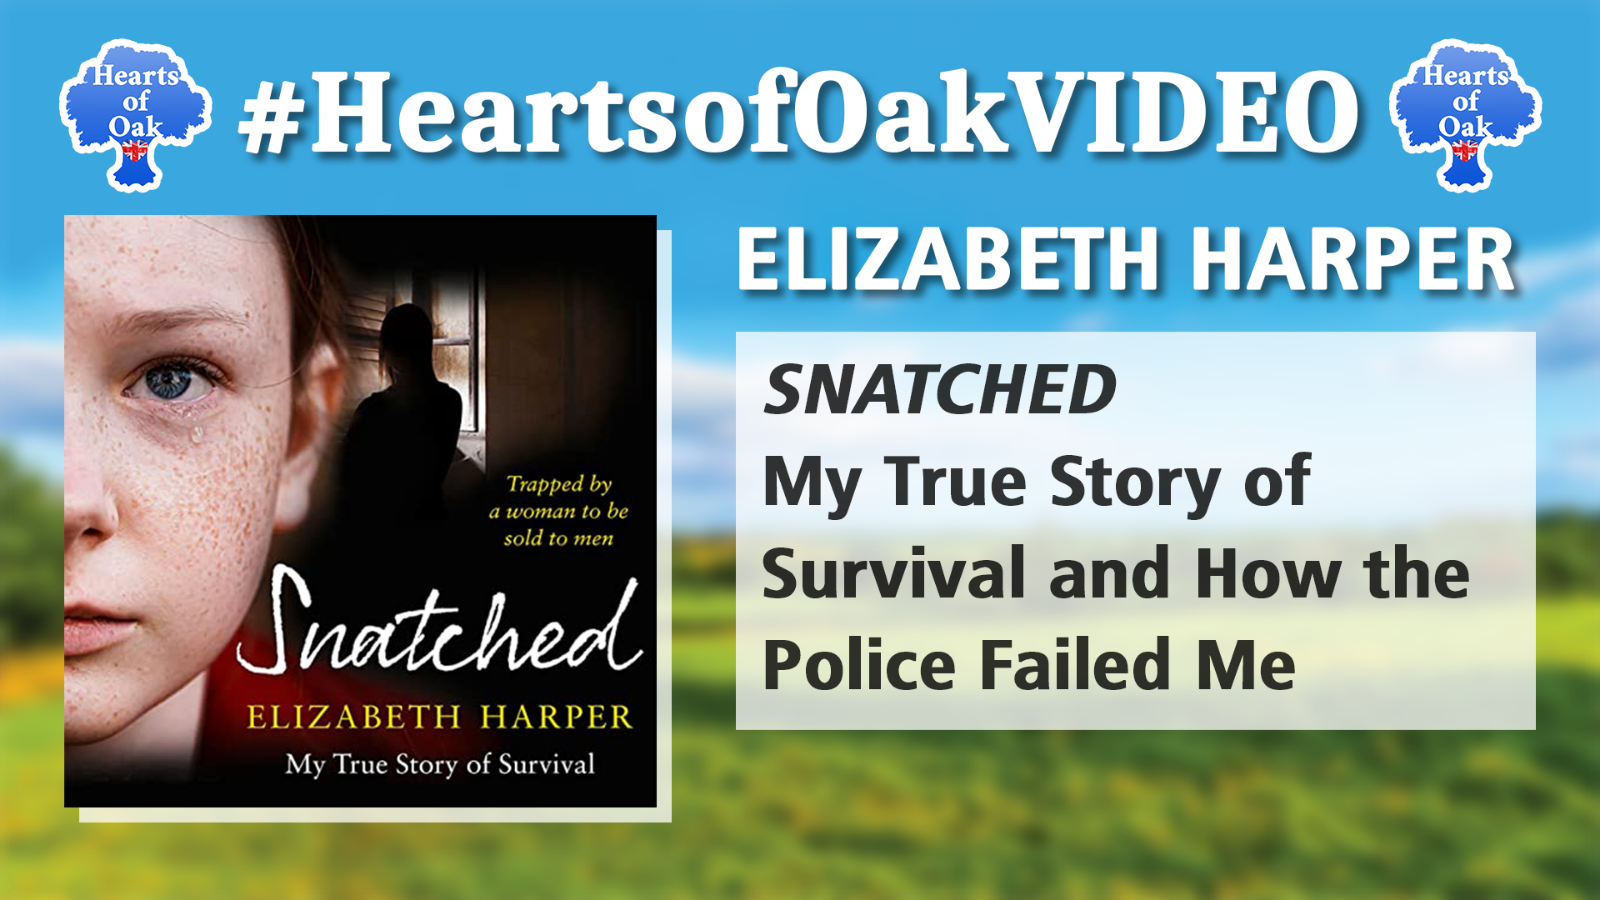 Elizabeth Harper - SNATCHED: My True Story of Survival and How the Police Failed Me